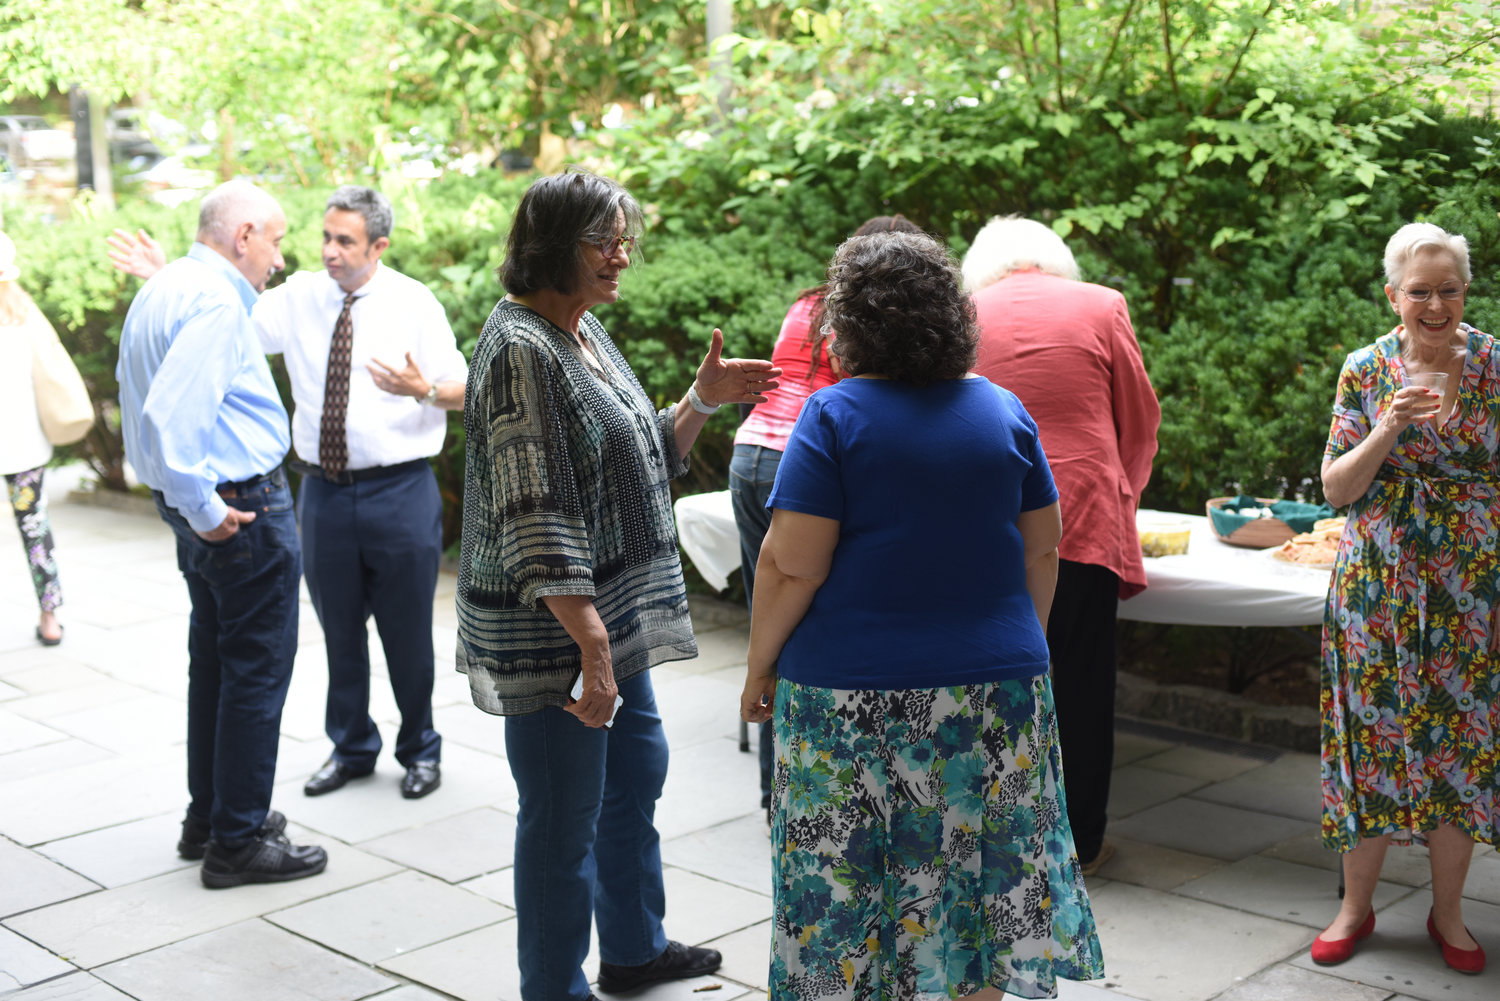 Rachel Rodna and Carol Kassel were just two of the many guests at last weekend’s Pride Shabbat at Riverdale Temple. They joined others to partake in light refreshments during the oneg ahead of Shabbat services.